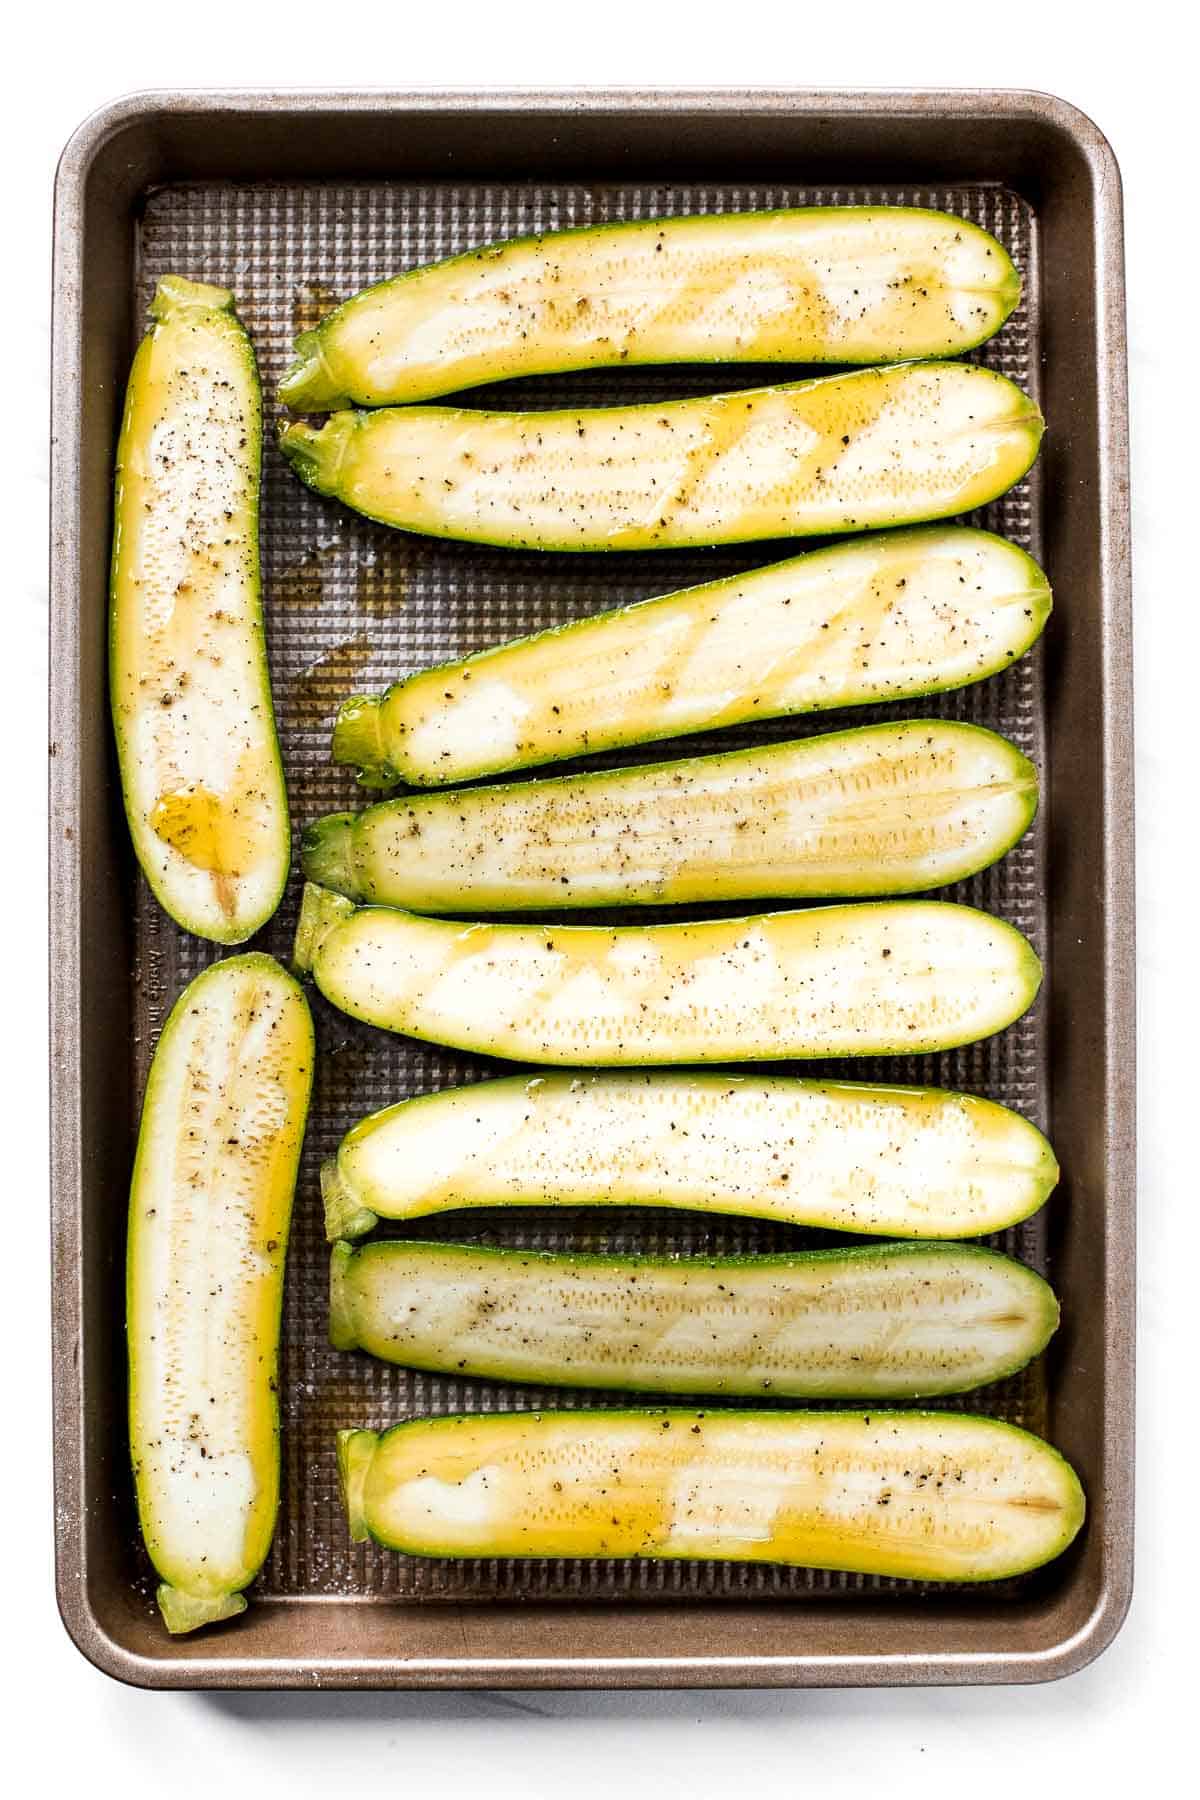 Cheesy Baked Zucchini with Marinara will save your weeknight dinner routine (and the kids love it too!). It's low carb, vegetarian, gluten-free, and keto. | aheadofthyme.com